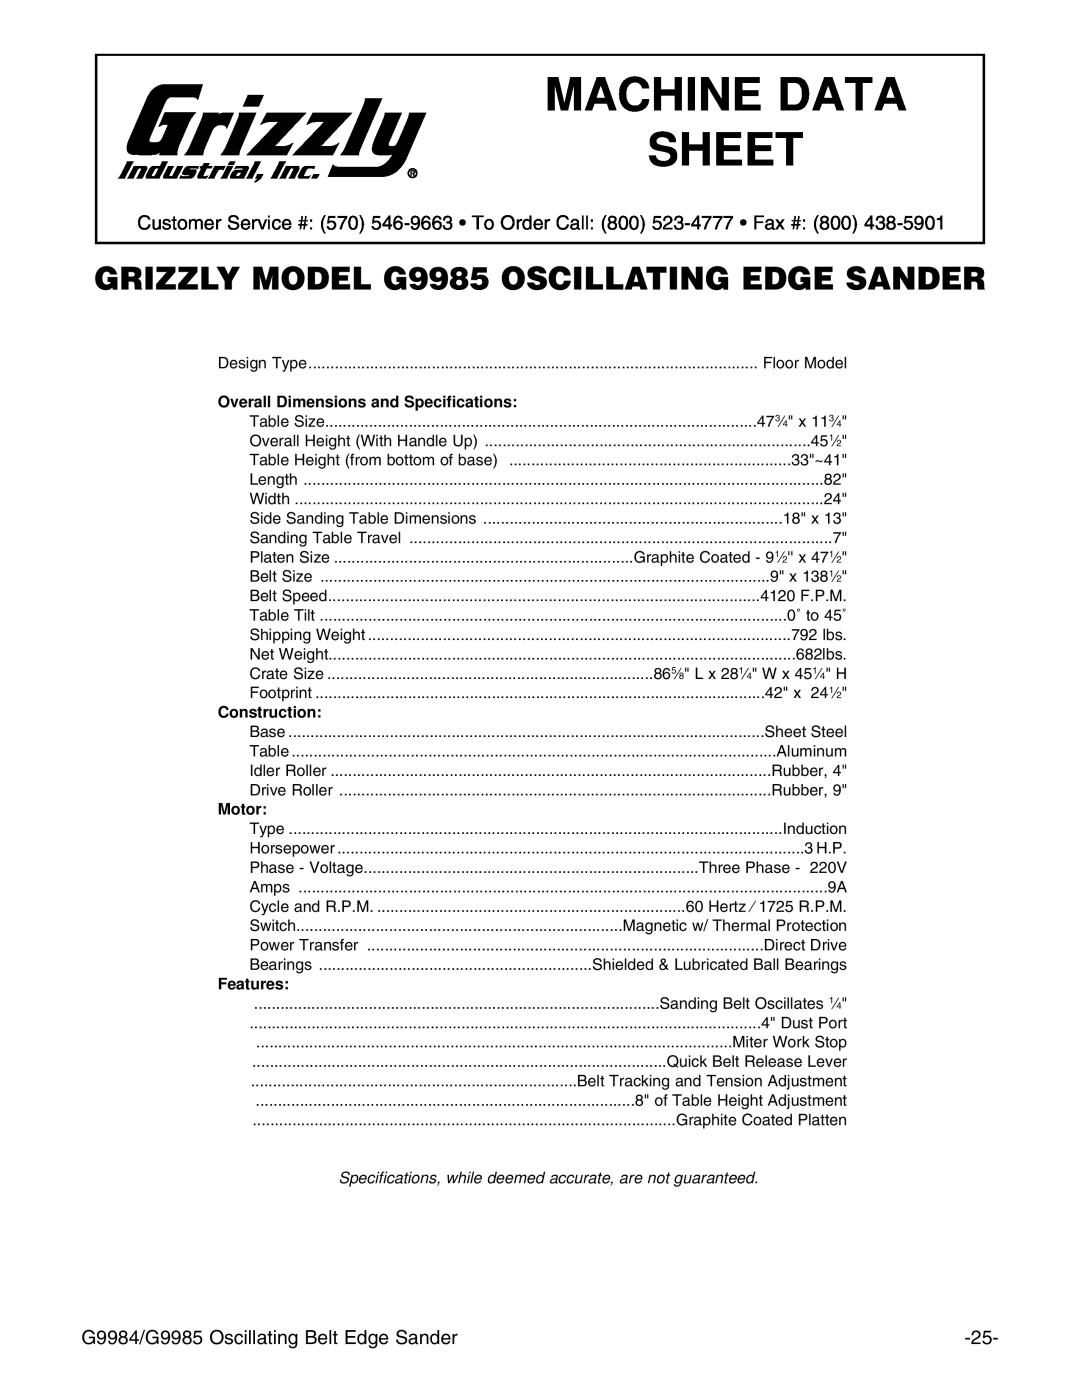 Grizzly Machine Data Sheet, GRIZZLY MODEL G9985 OSCILLATING EDGE SANDER, Overall Dimensions and Specifications, Motor 